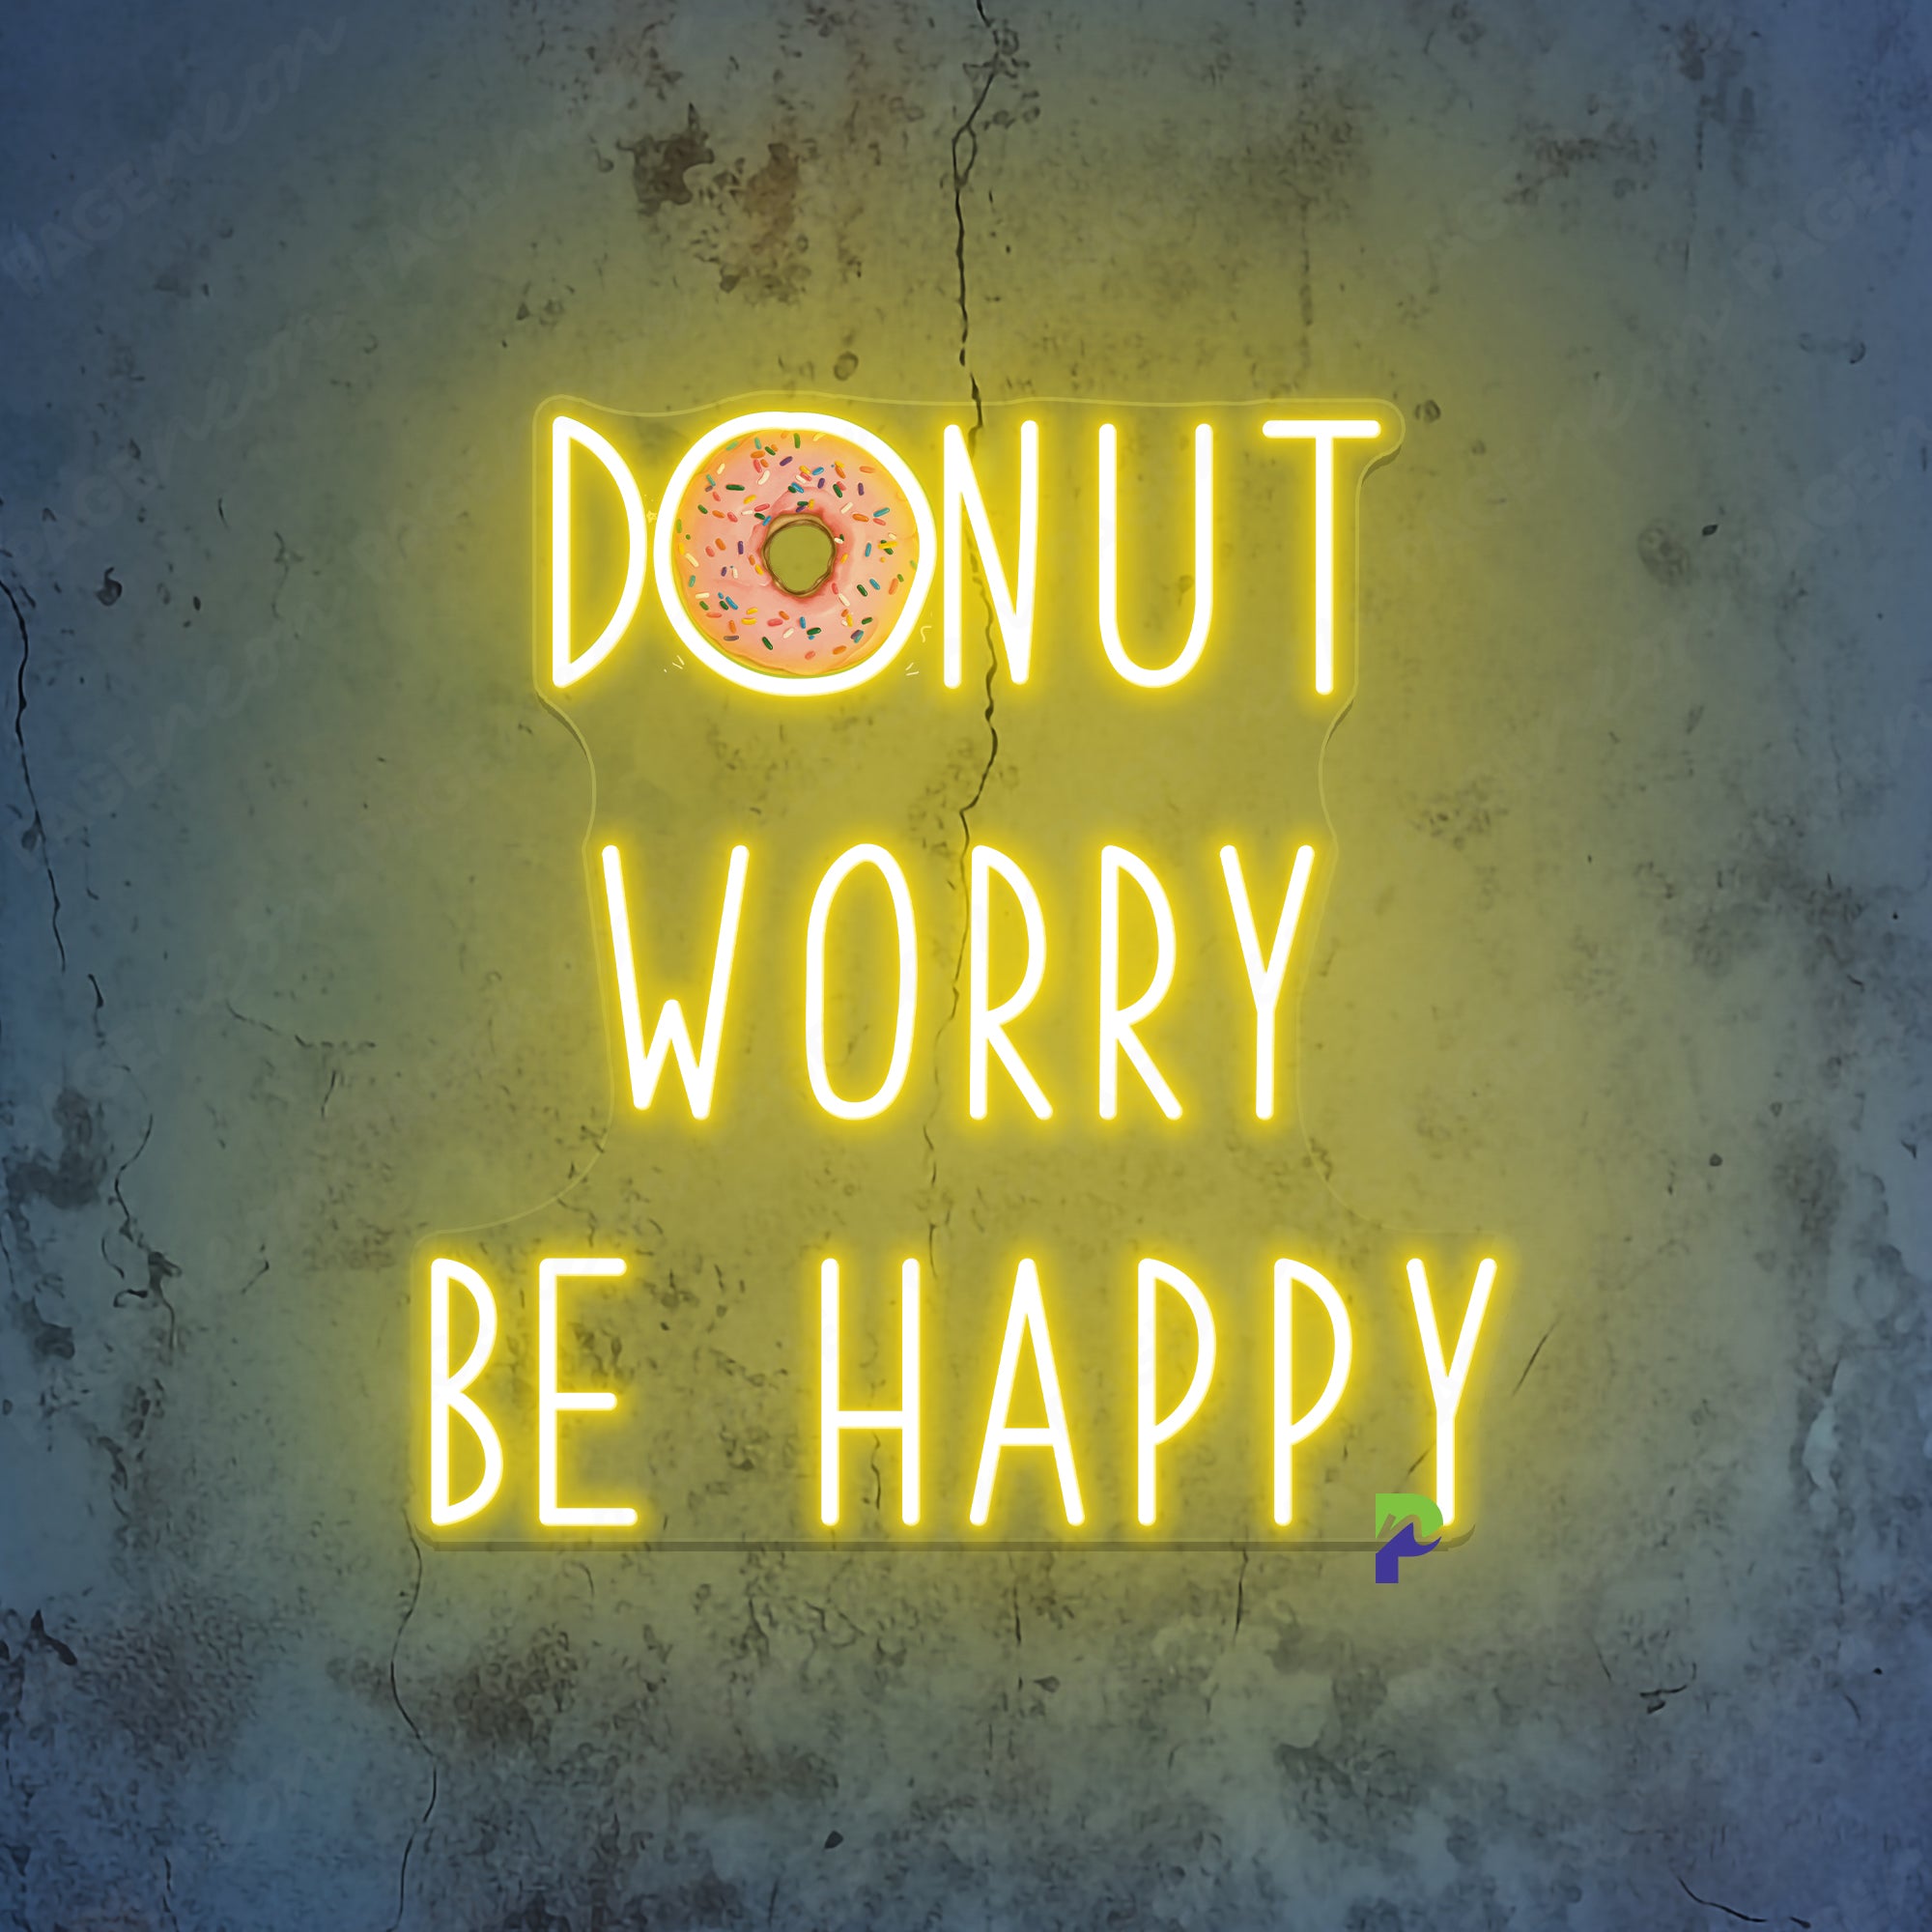 Donut Worry Be Happy Neon Sign Led Light